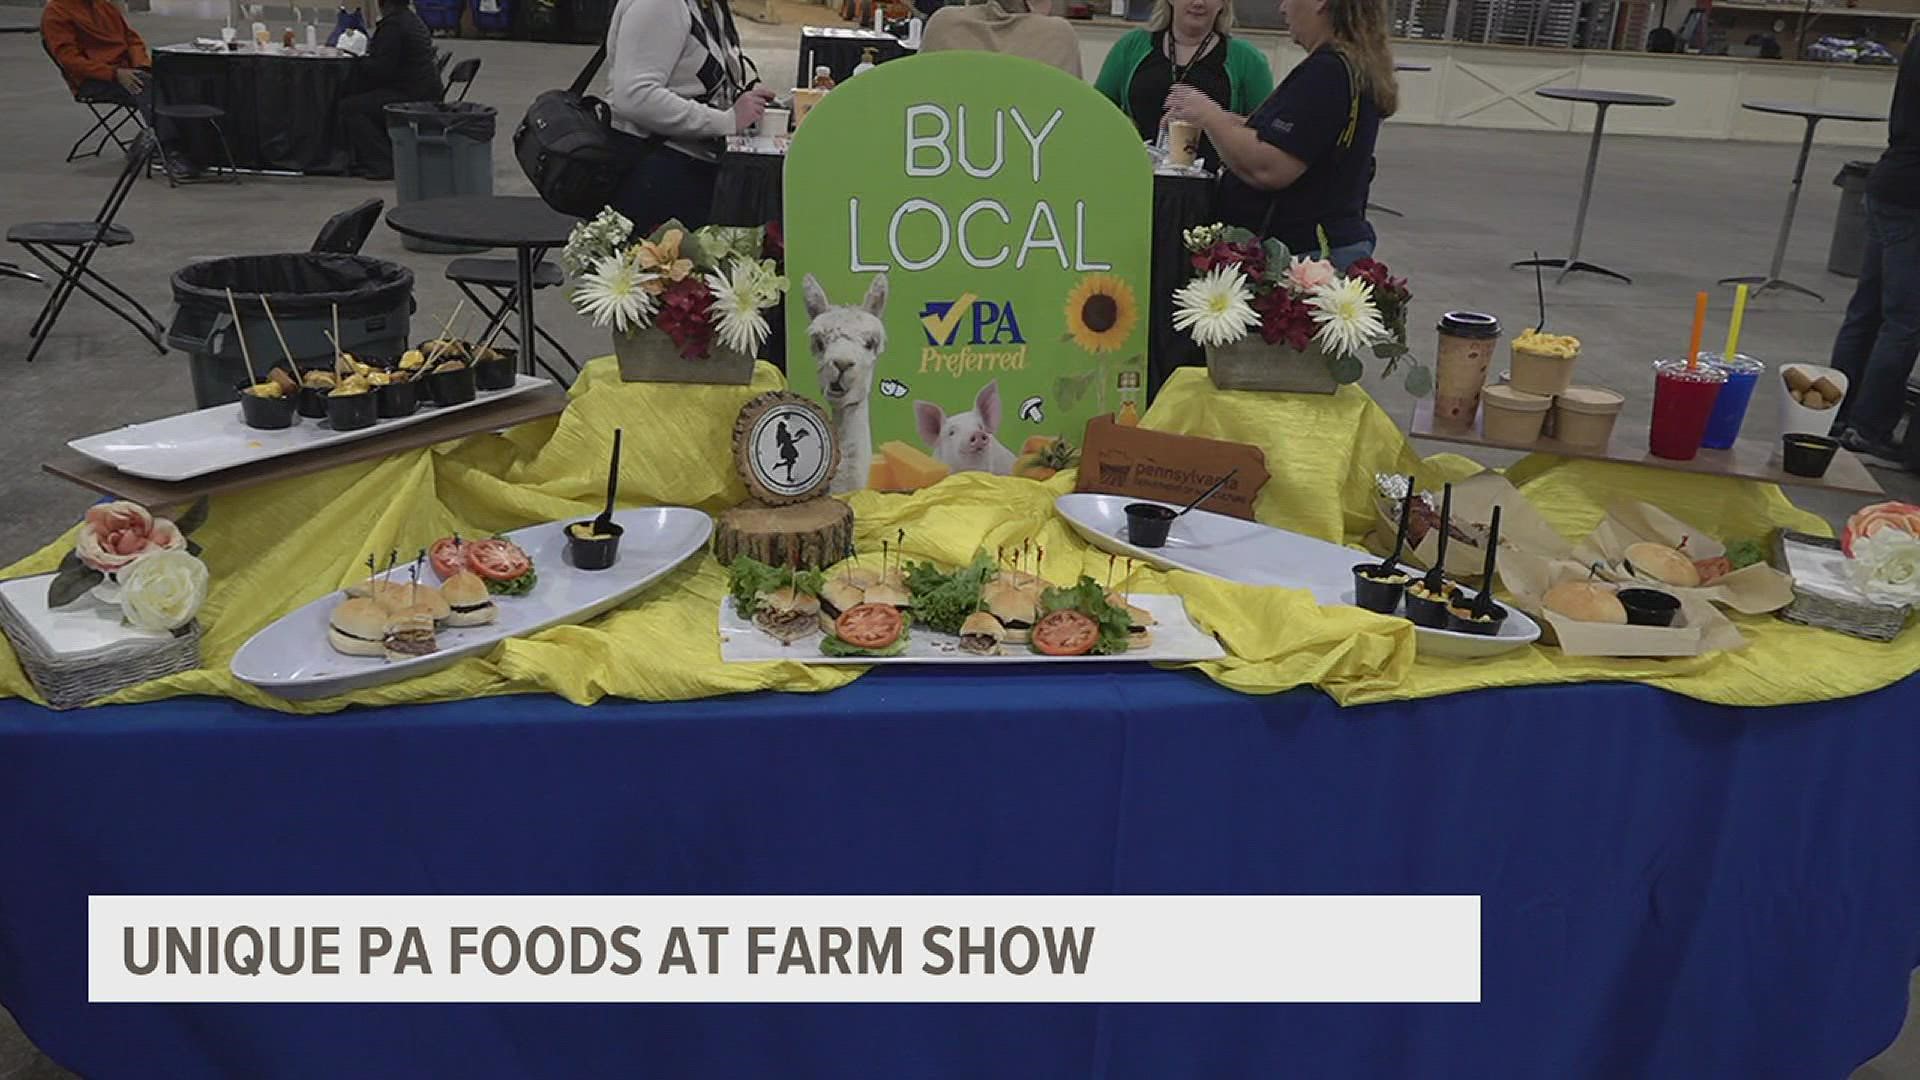 Pennsylvanians look forward to the Pa. Farm Show all year long and the food is a big reason why. This year, there are unique new options to try.